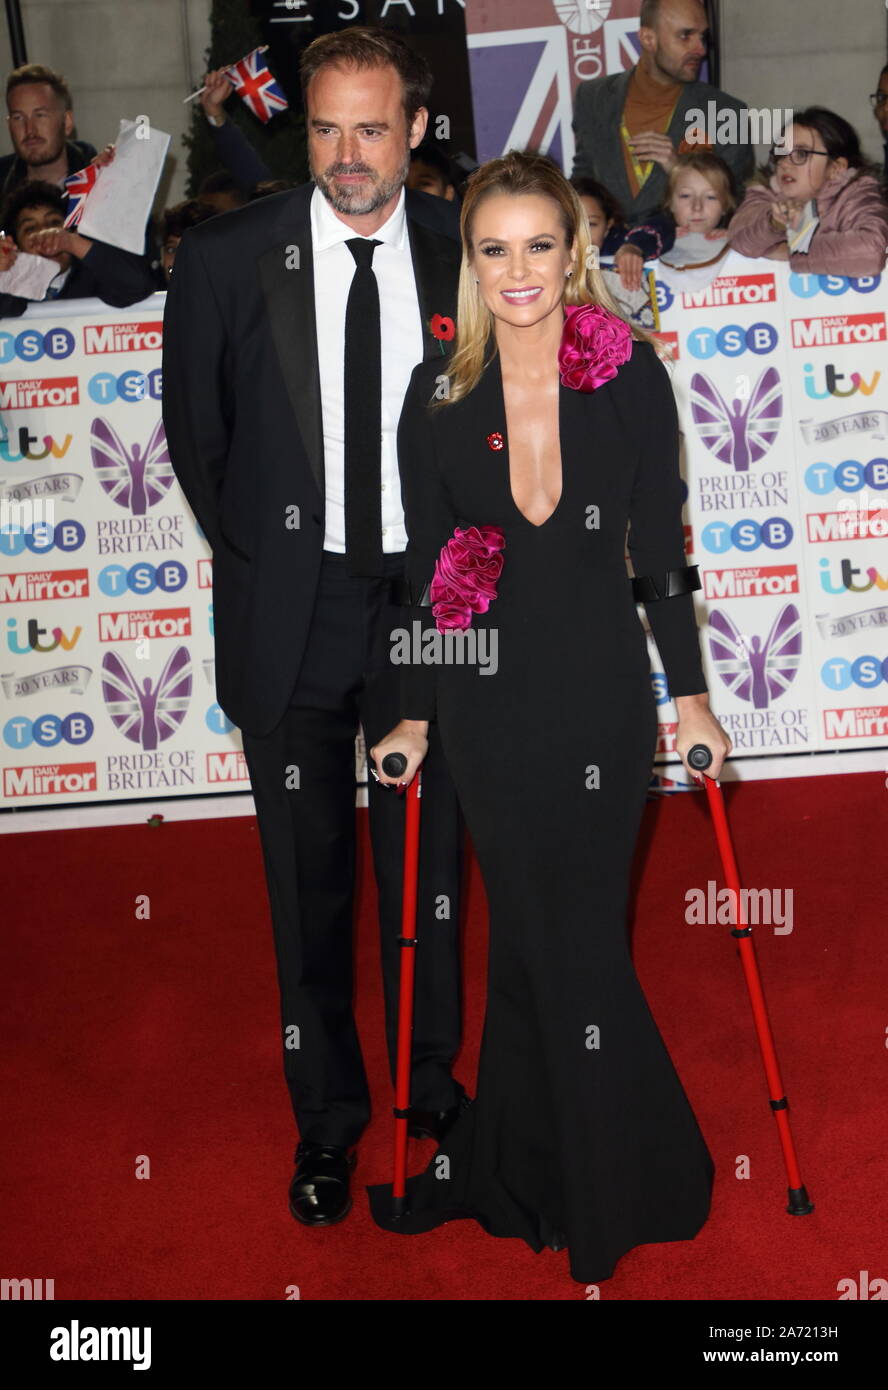 Jamie Theakston and Amanda Holden on the red carpet at The Daily Mirror Pride of Britain Awards, in partnership with TSB, at the Grosvenor House Hotel, Park Lane. Stock Photo